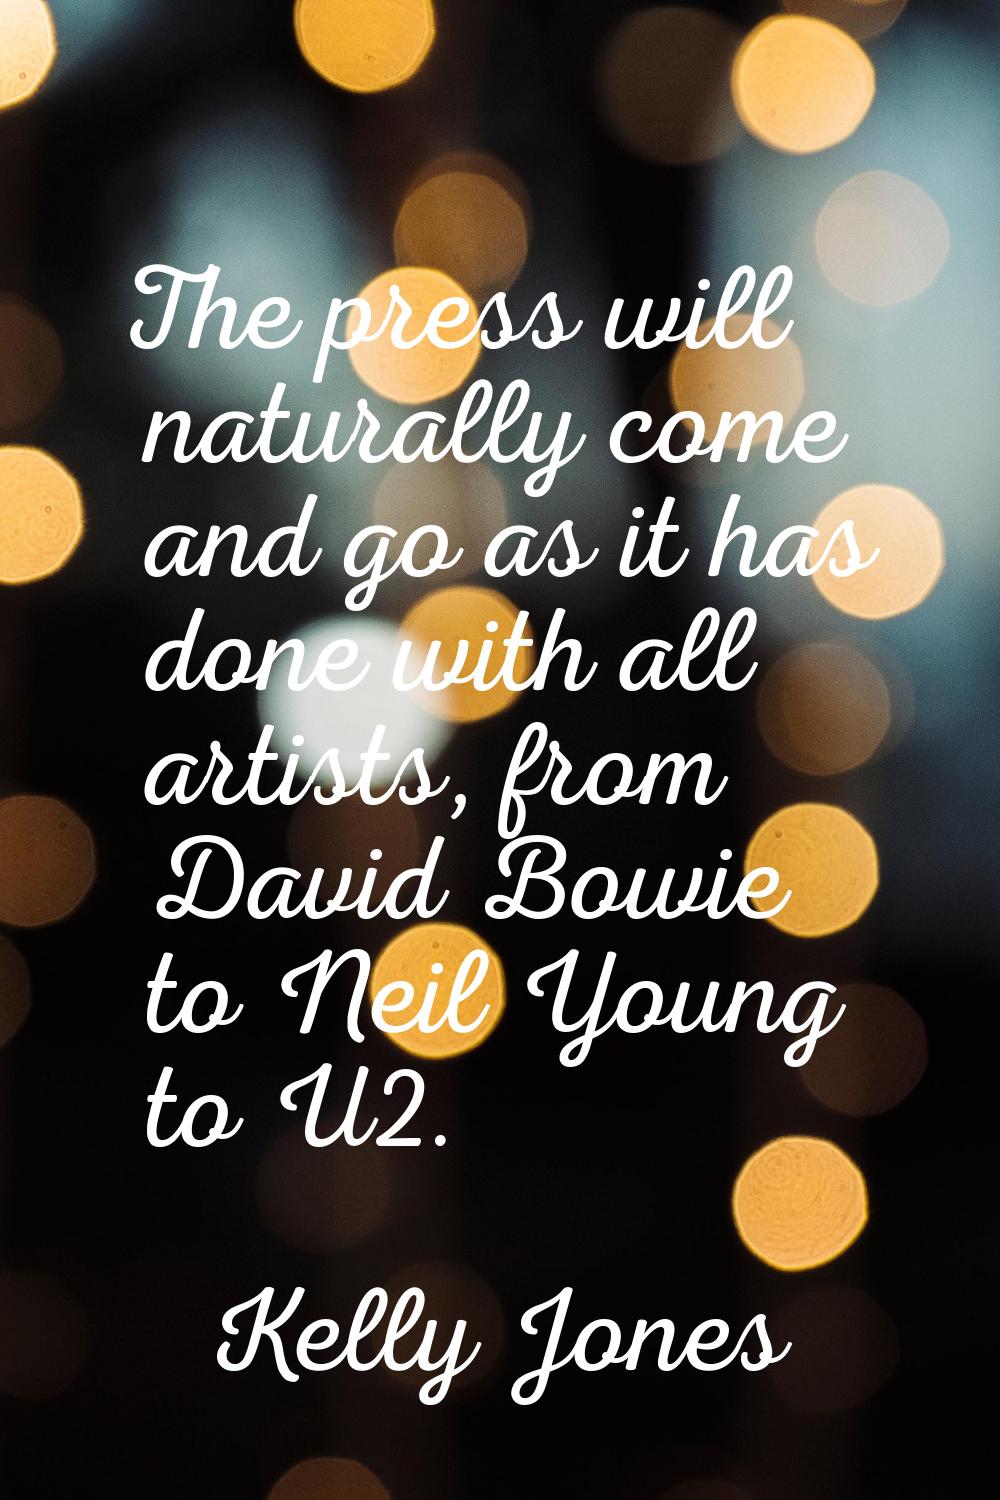 The press will naturally come and go as it has done with all artists, from David Bowie to Neil Youn